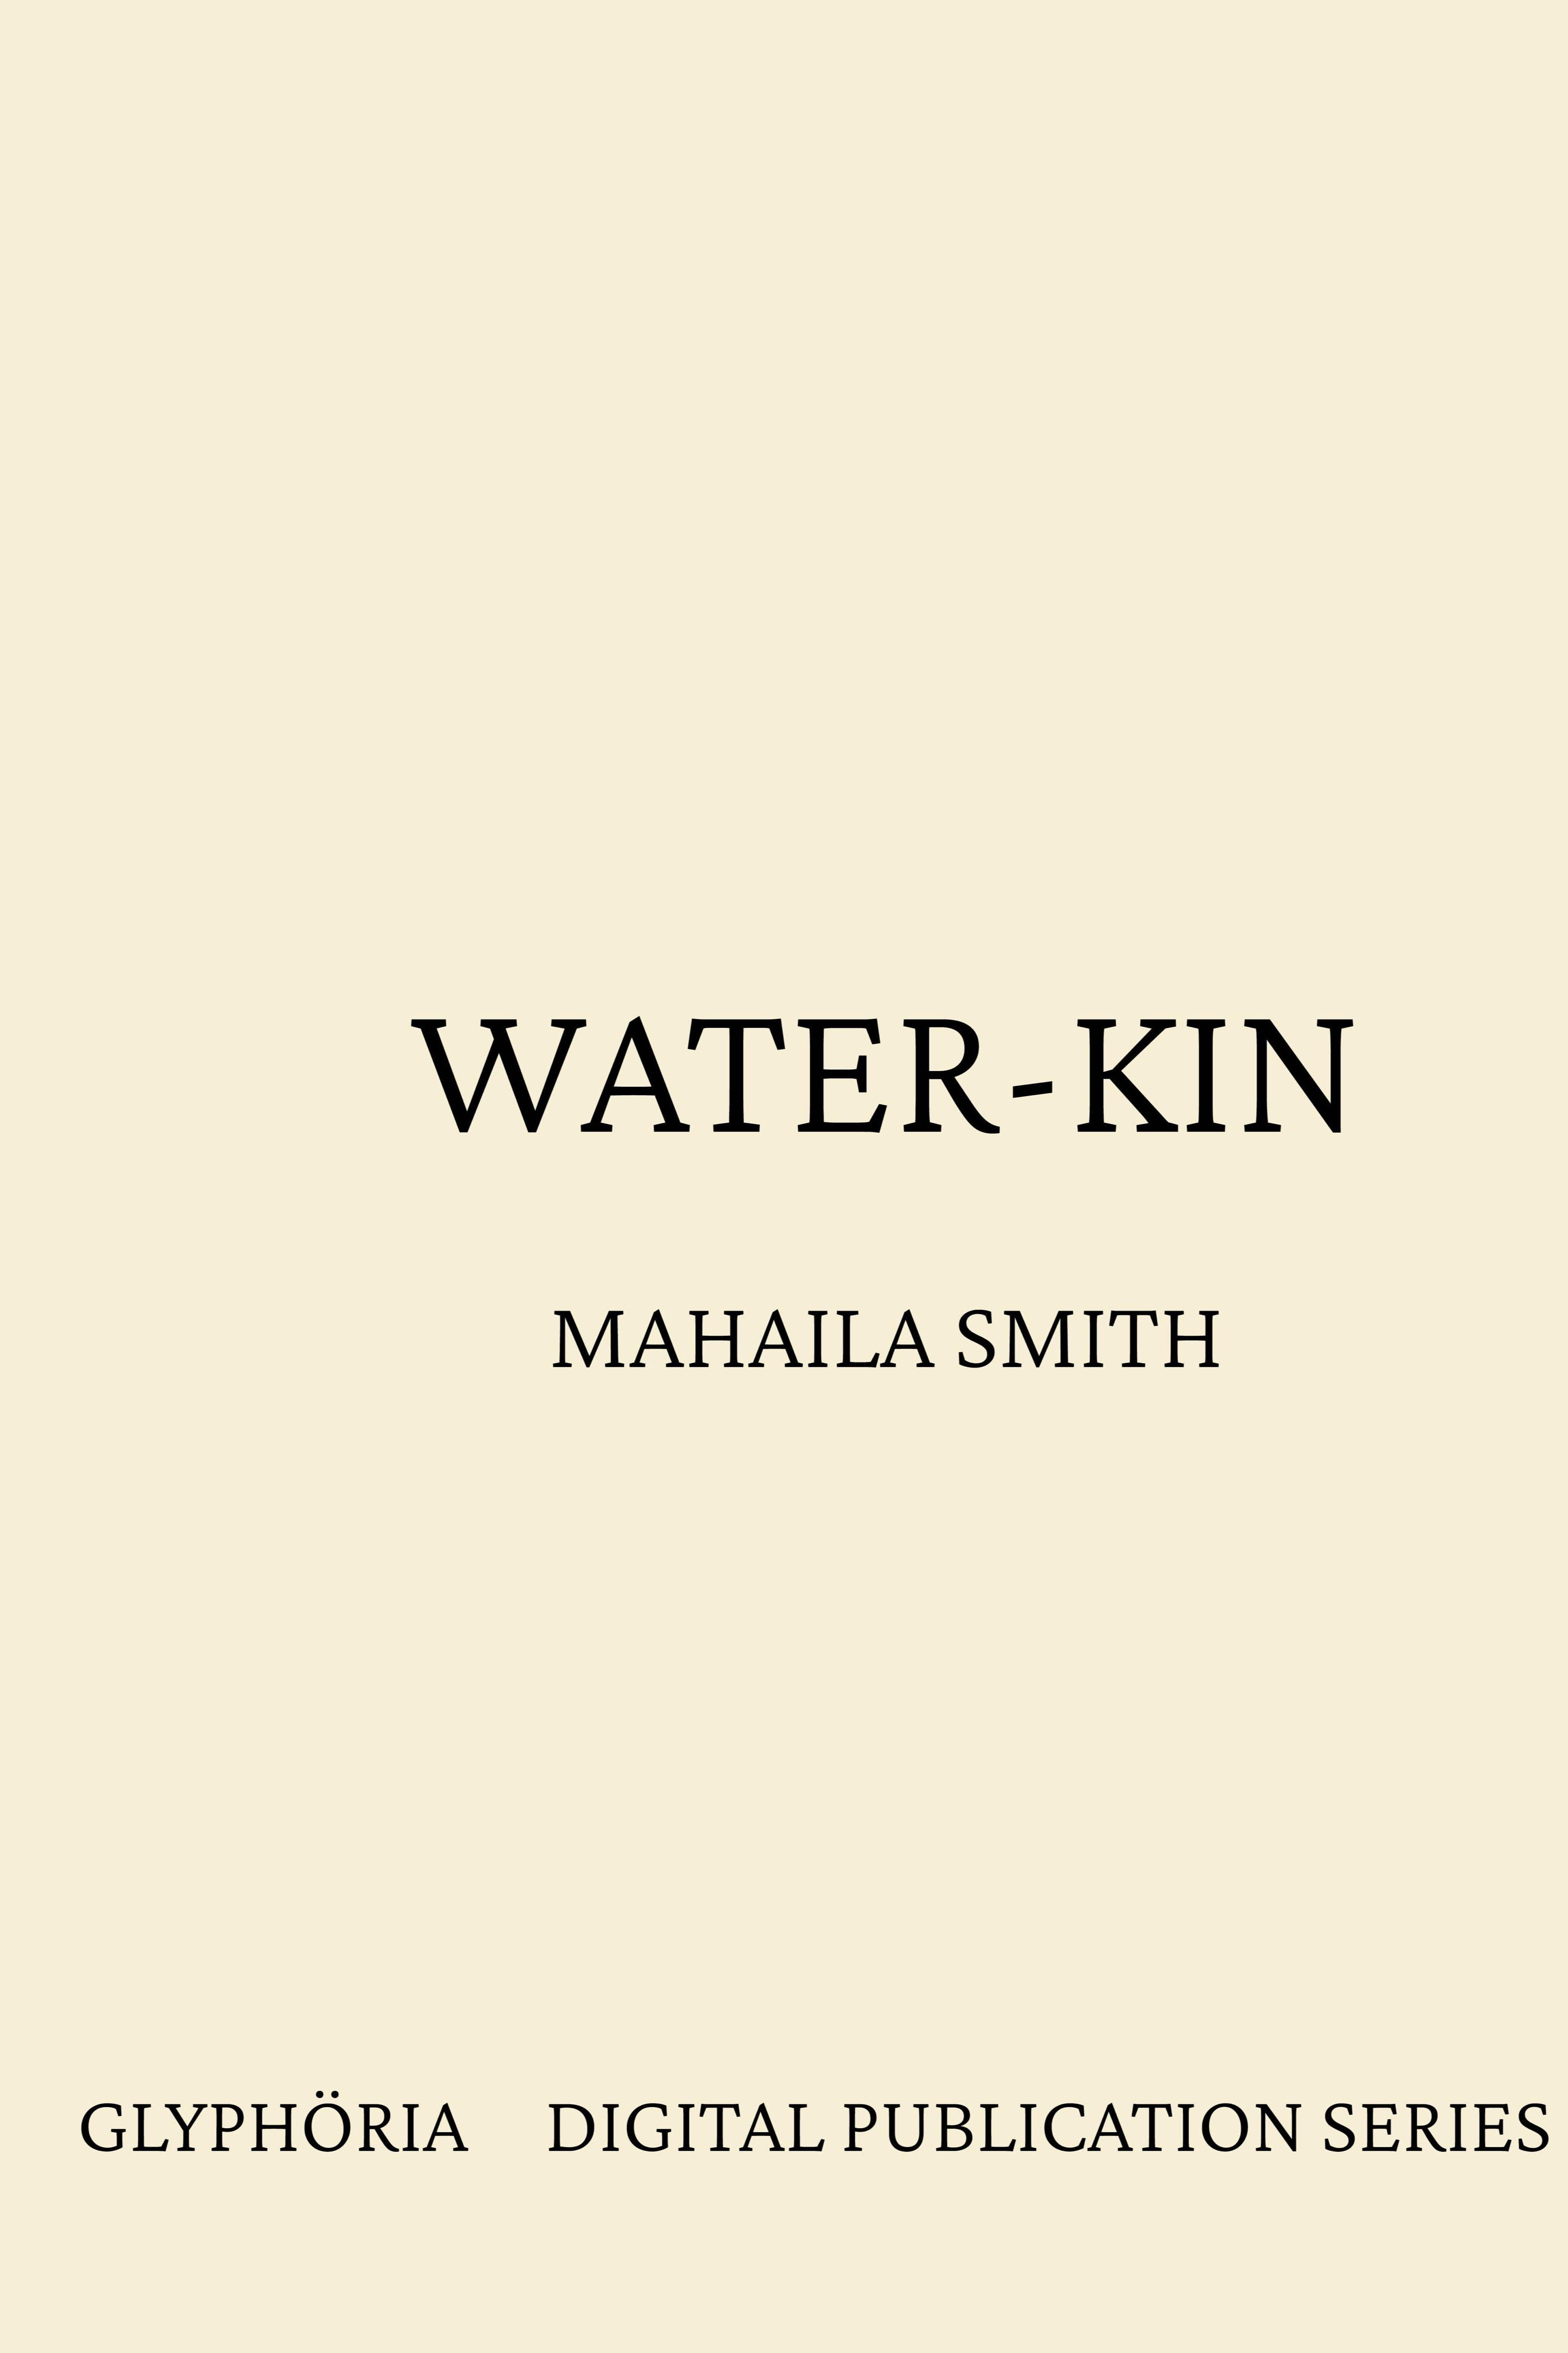 Book cover of Water-Kin by Mahaila Smith